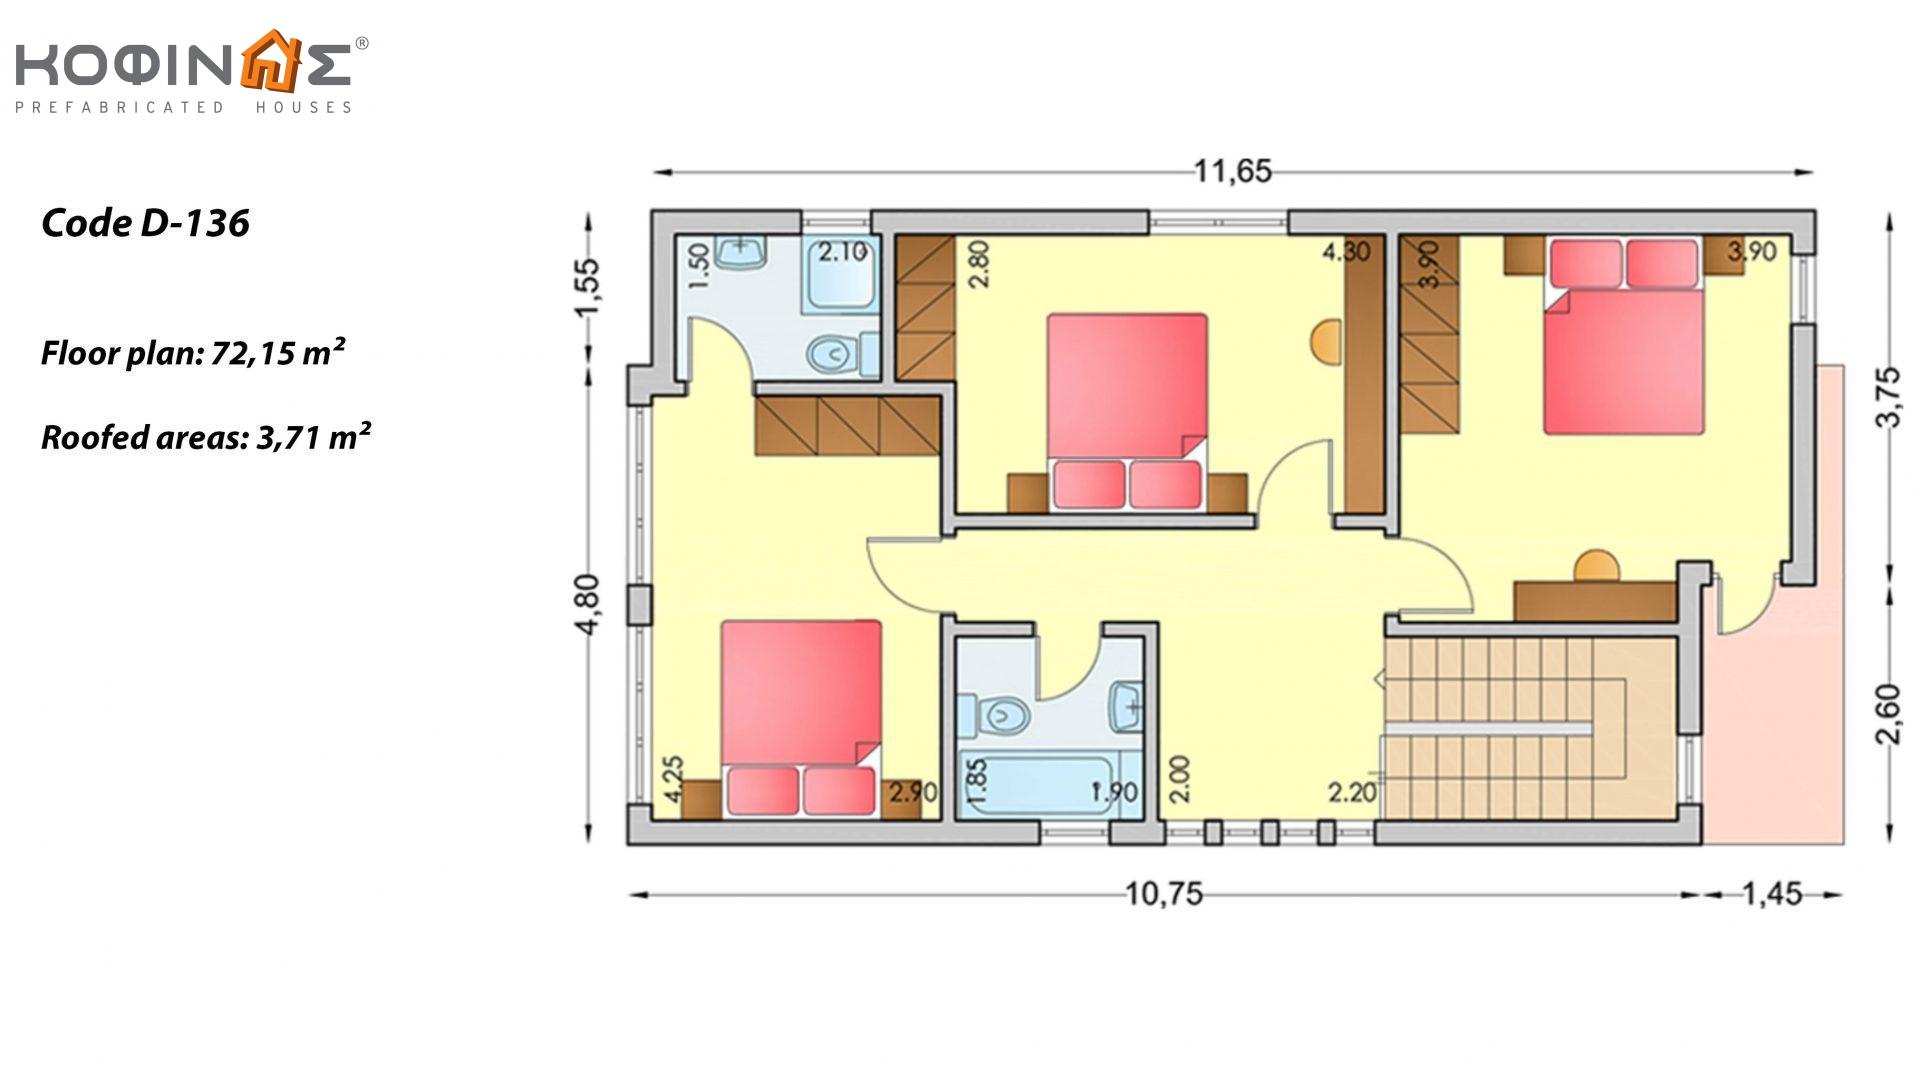 2-story house D-136, total surface of 136,39 m²,covered roofed areas 14.8 m²